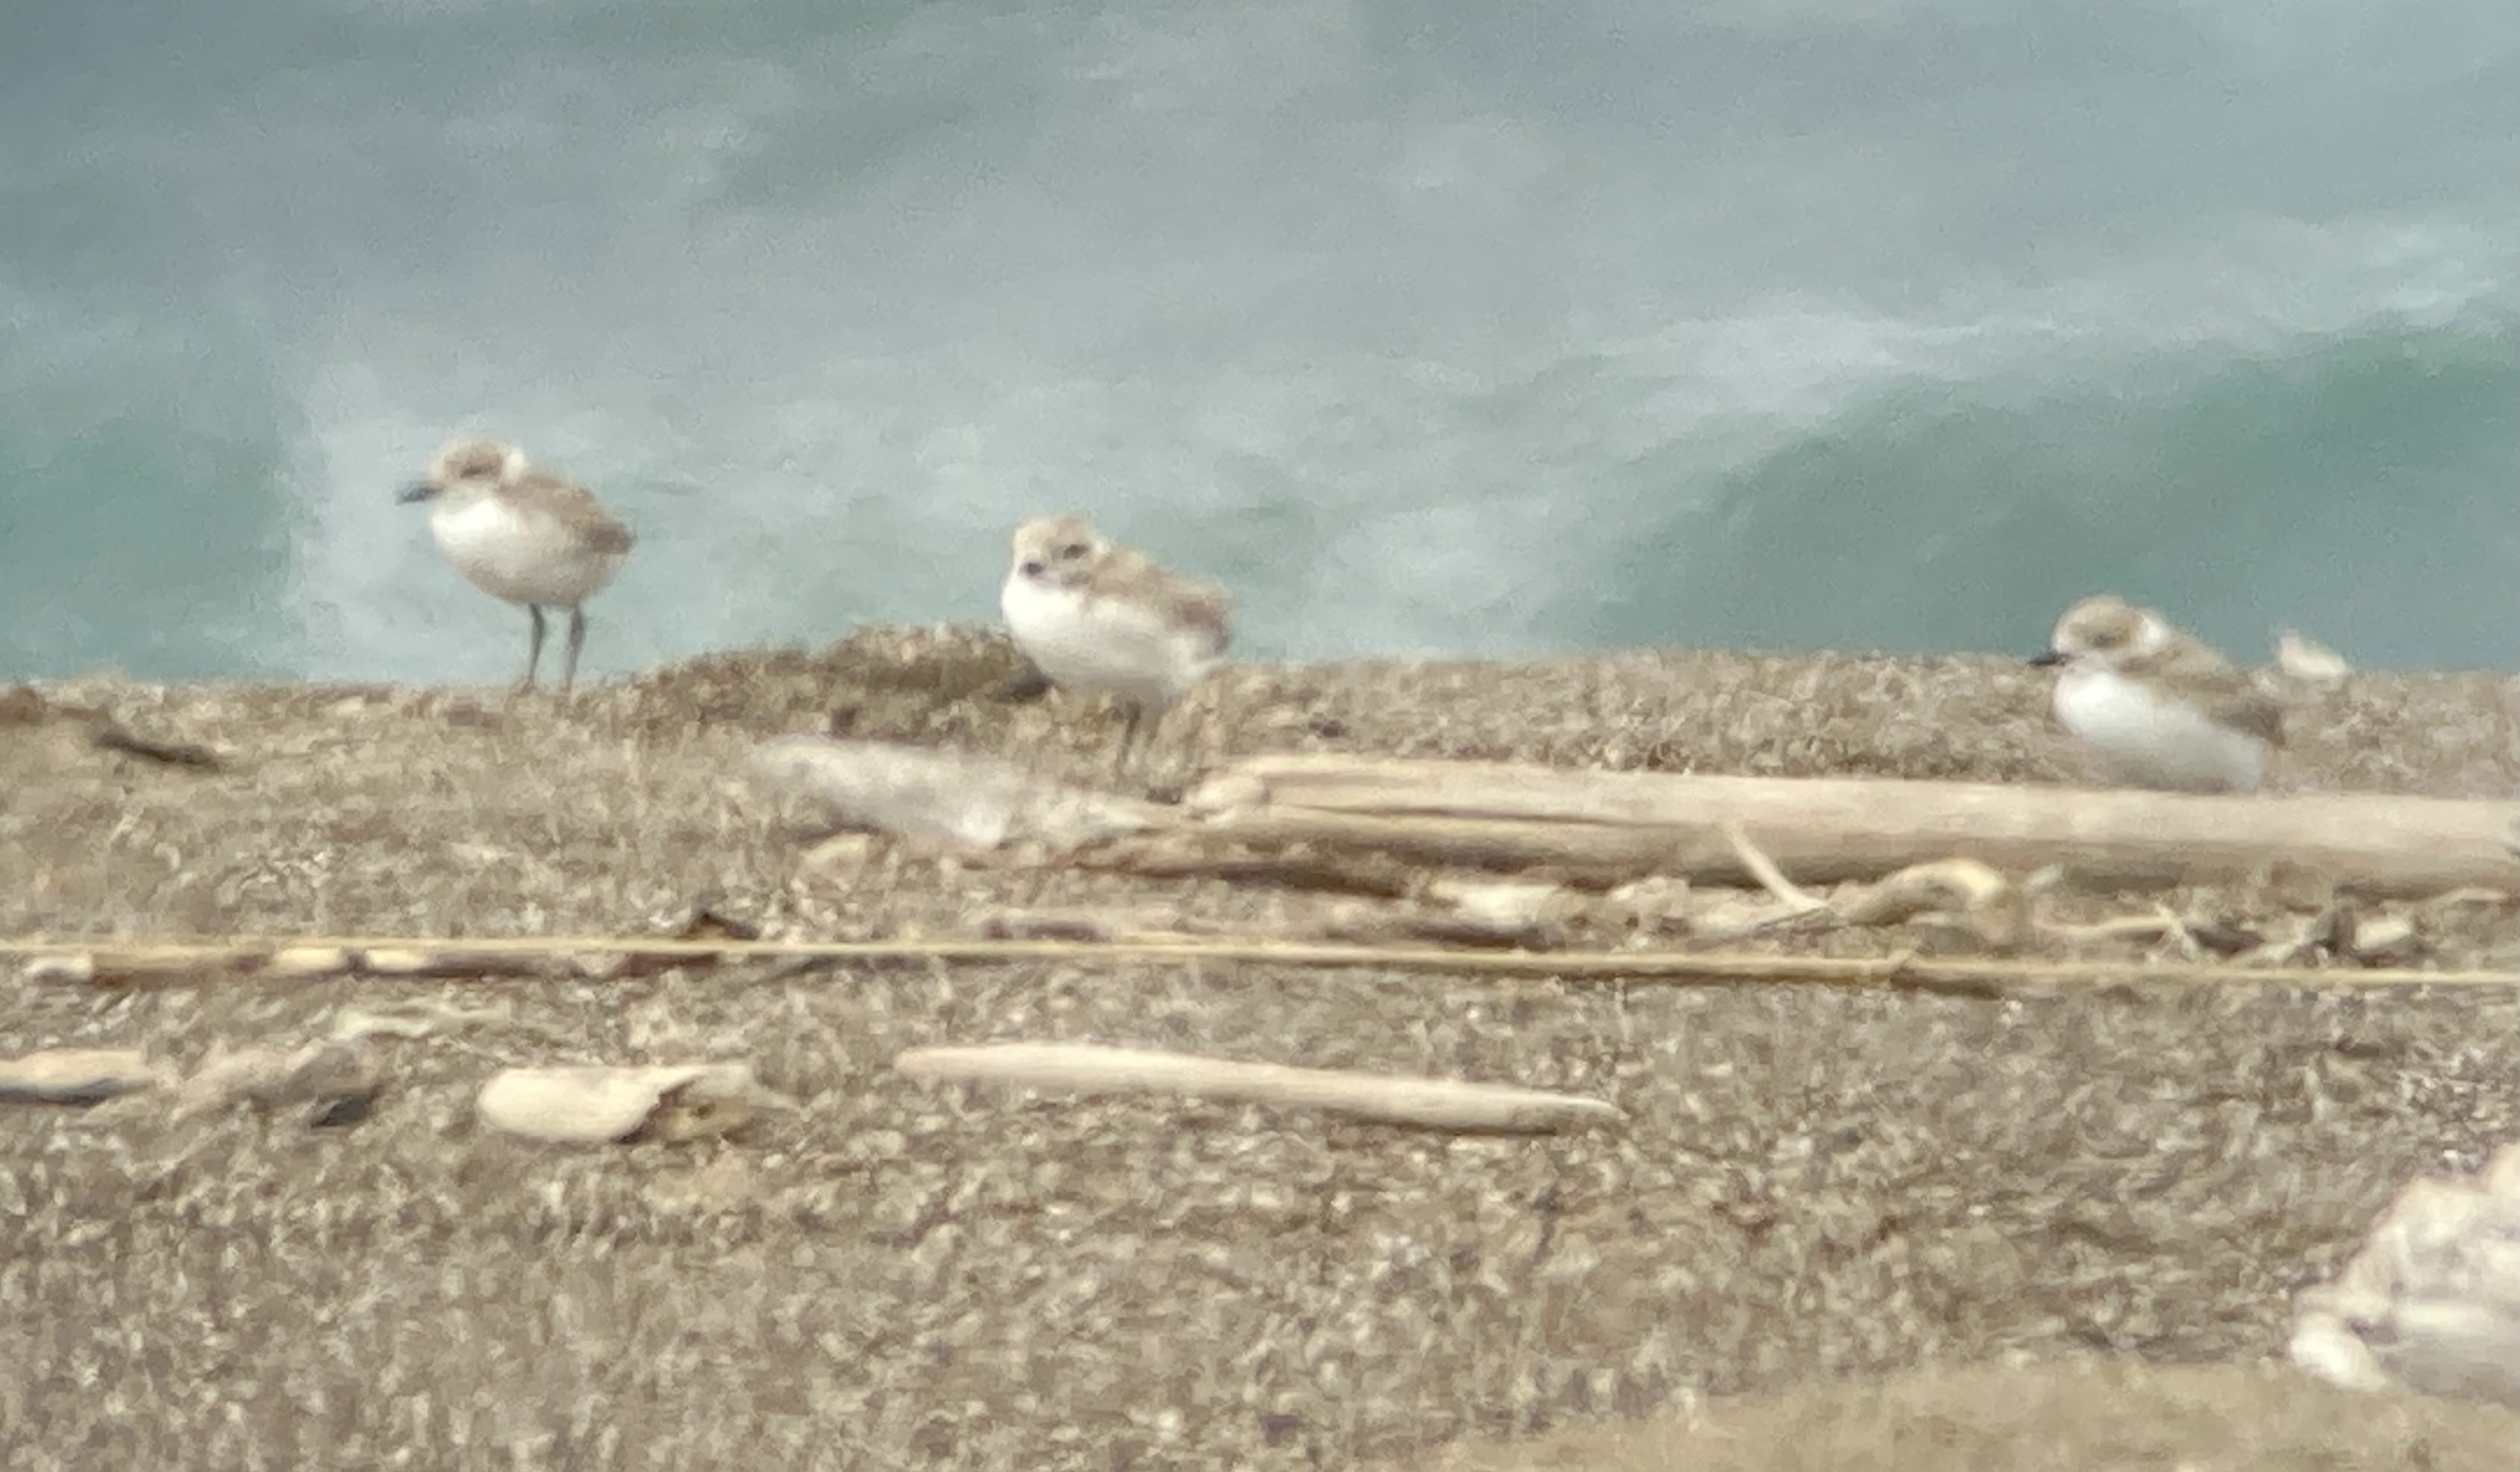 A photo of a three small grayish-brown shorebirds standing close to one another on a sandy beach among small pieces of driftwood